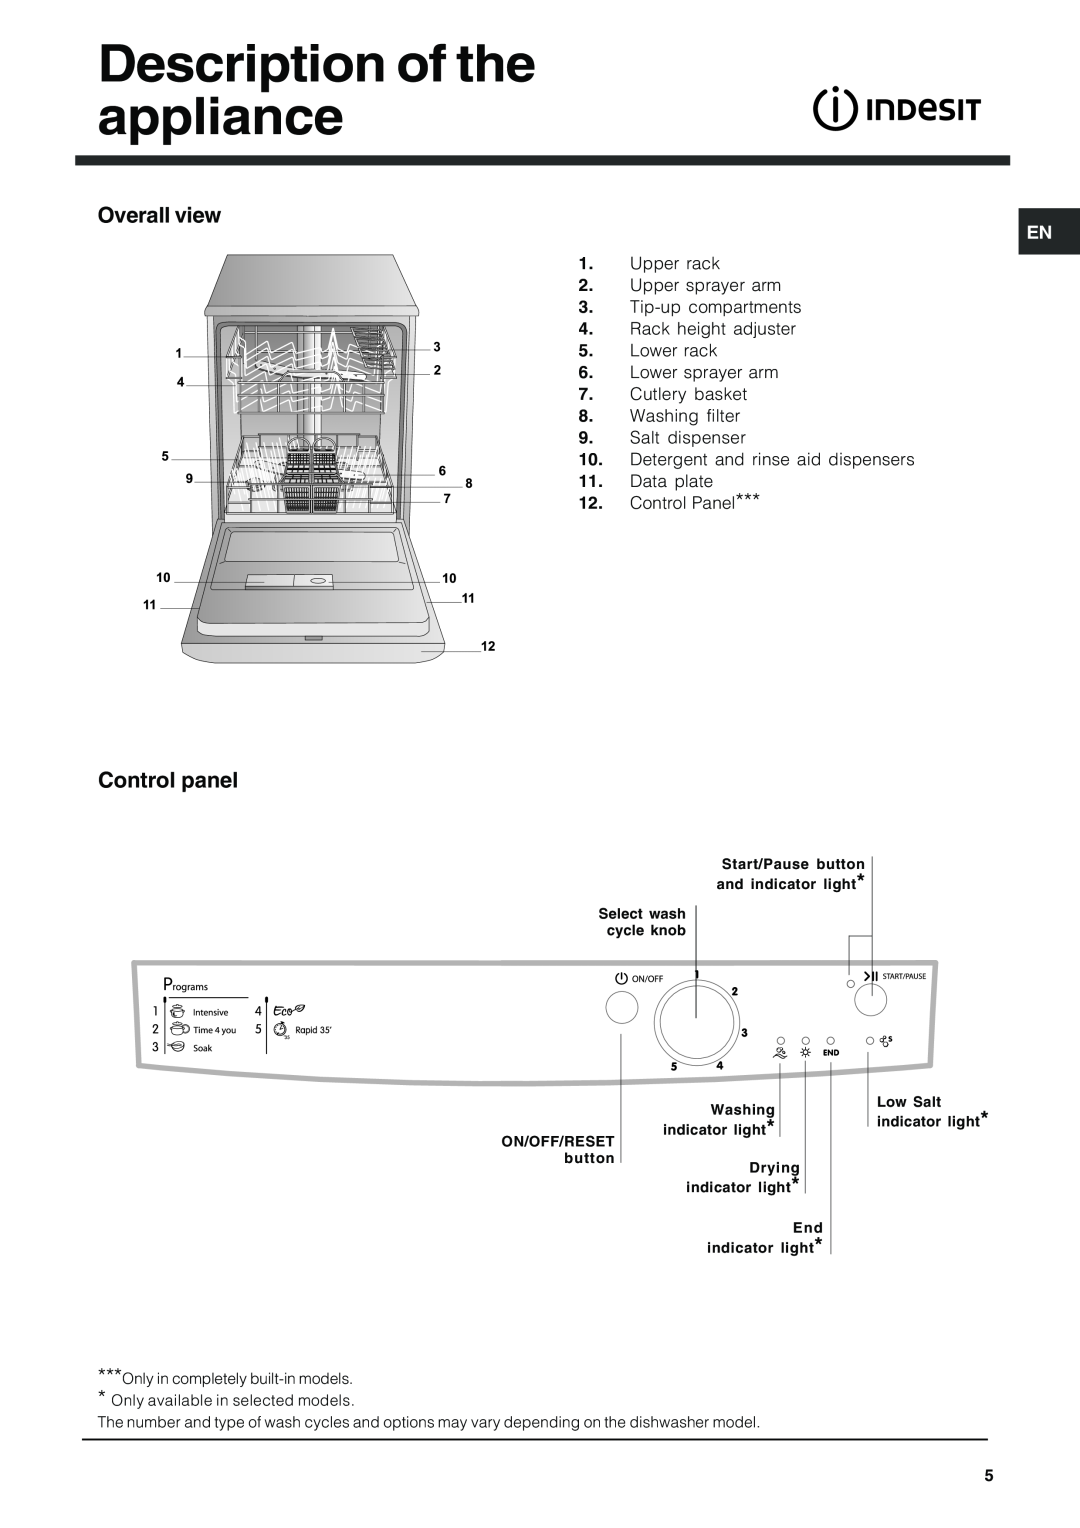 Indesit IDF125 manual Description of the appliance, Overall view, Control panel 